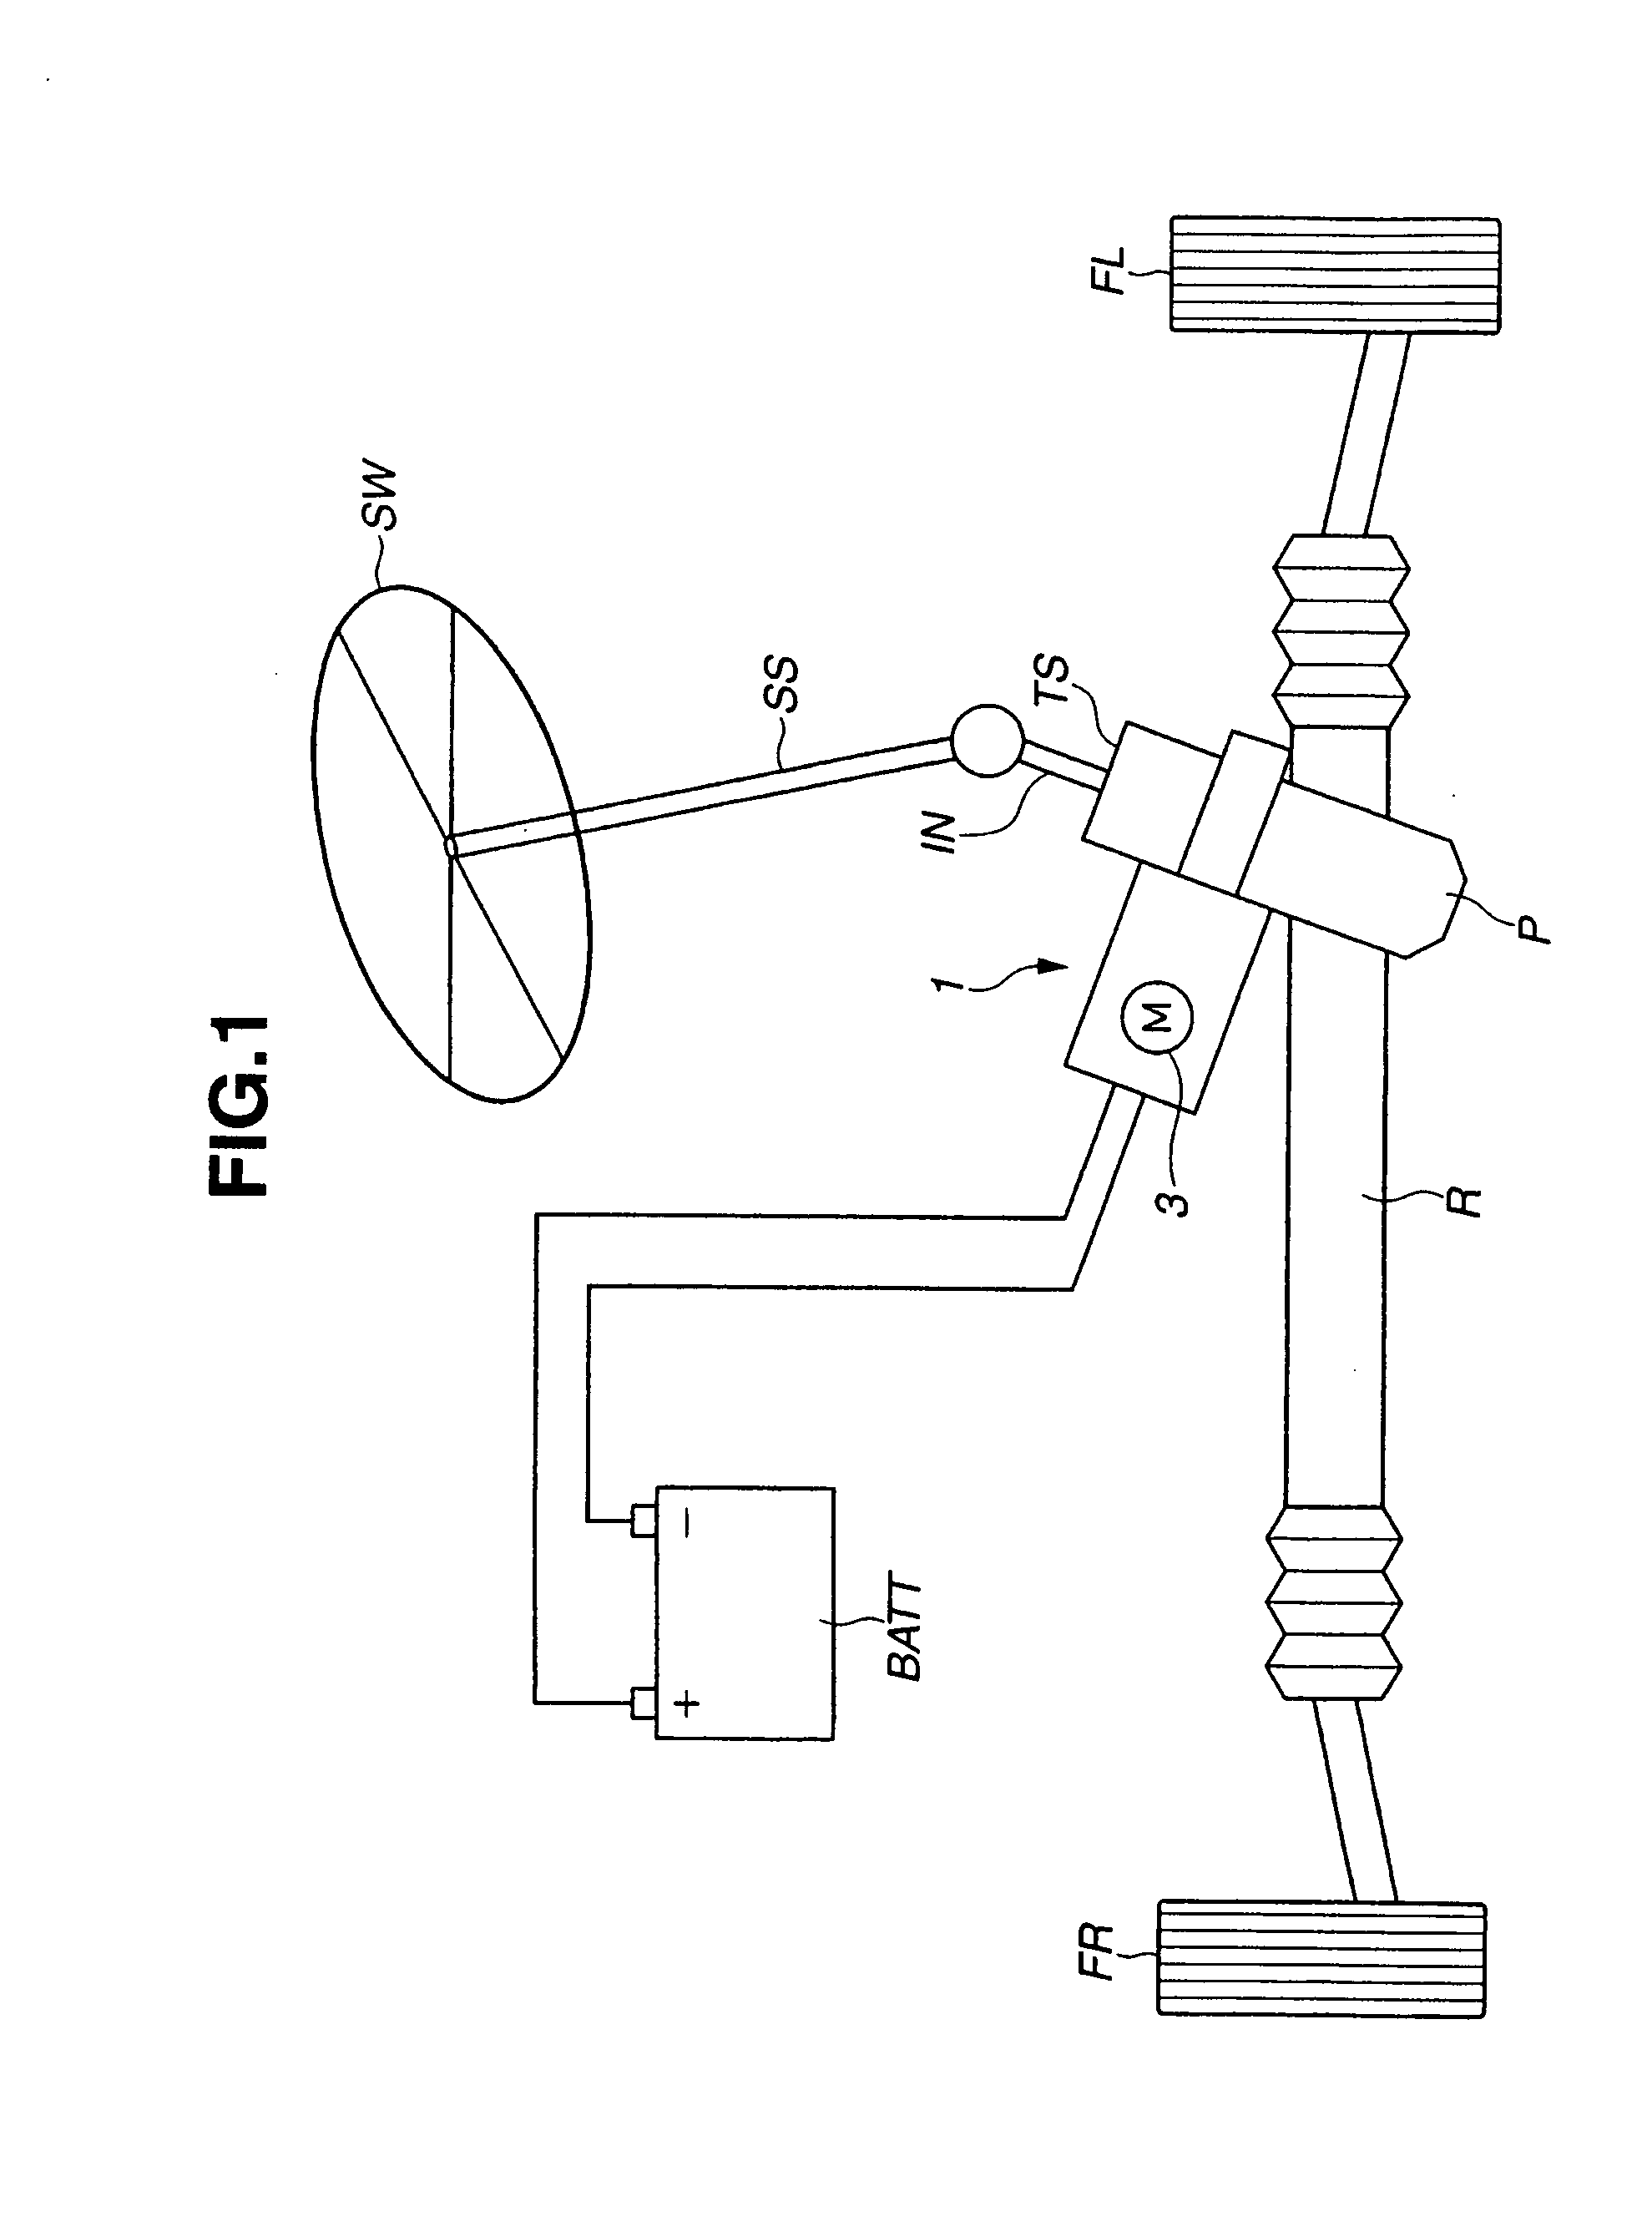 Motor drive apparatus and its inspection method